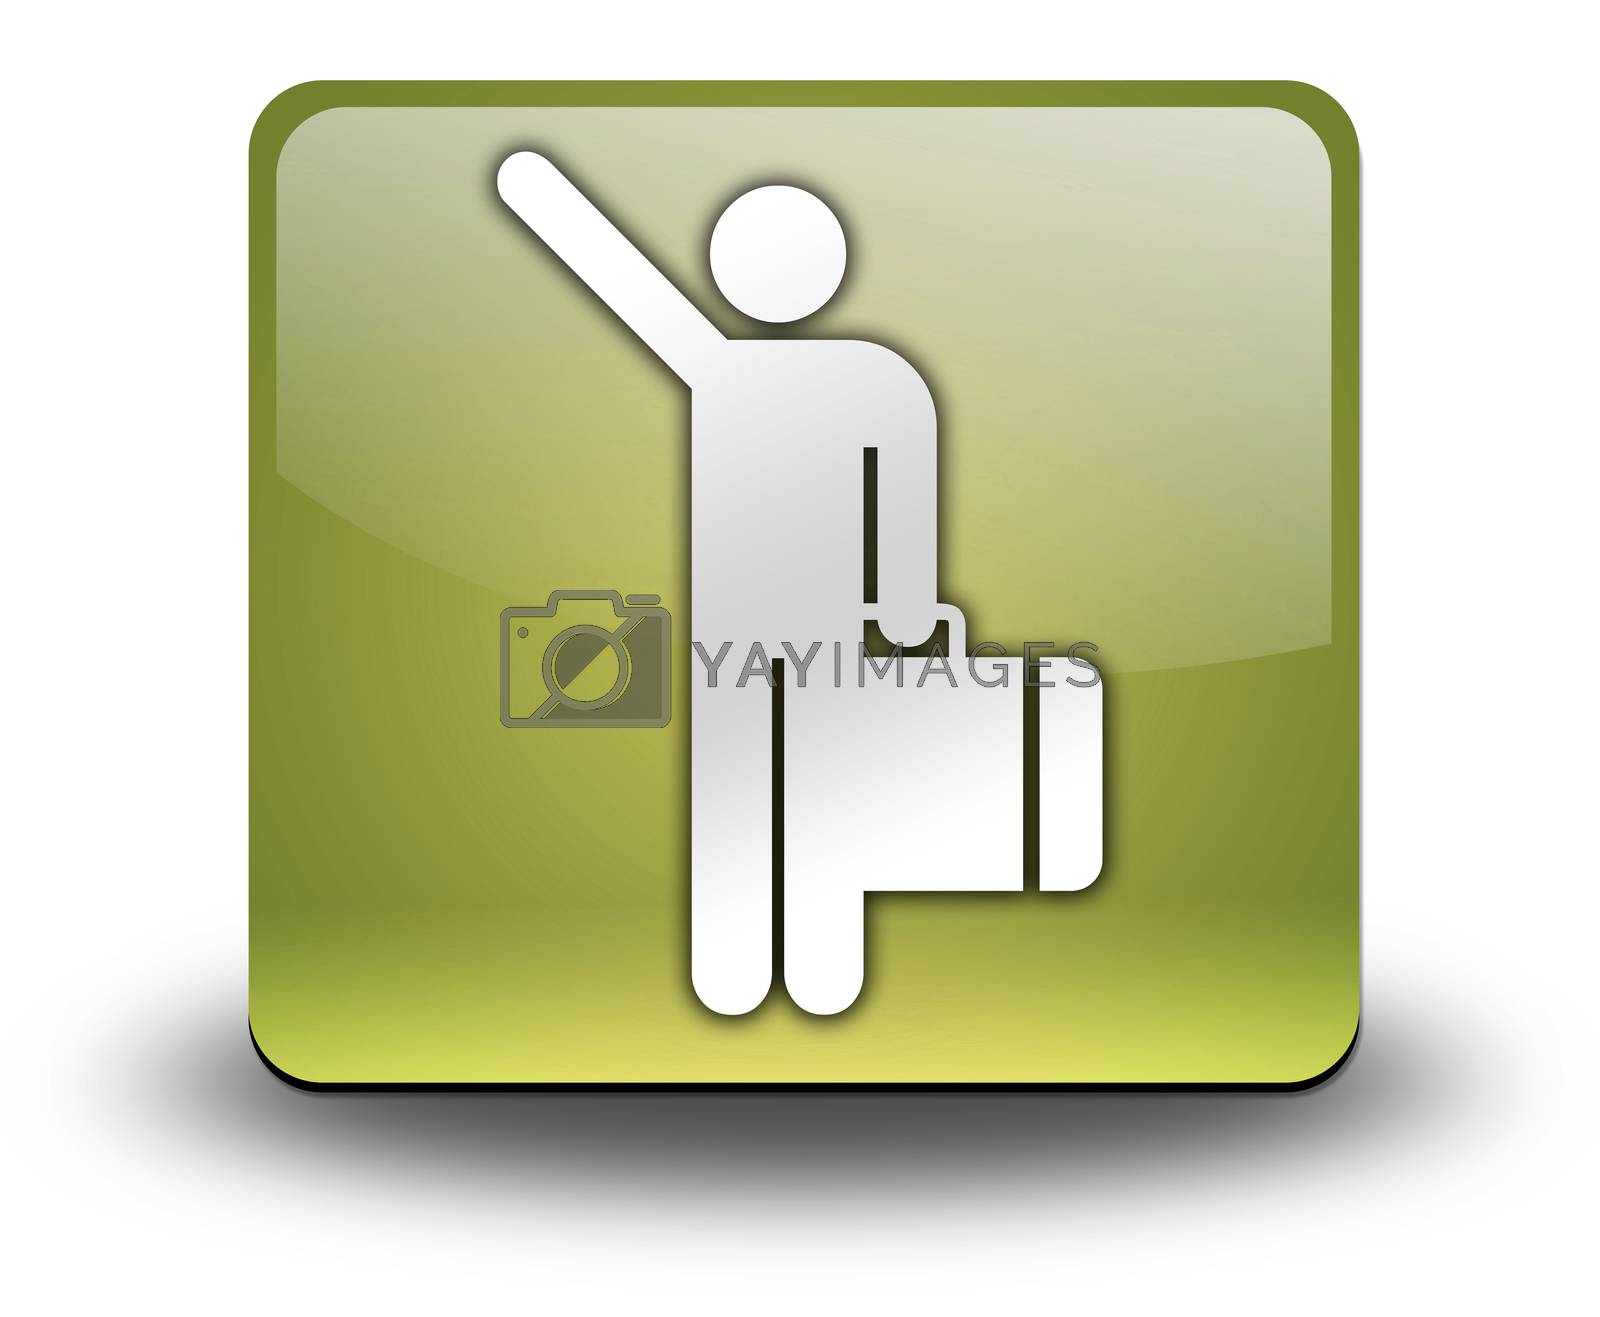 Royalty free image of Icon, Button, Pictogram Arriving Flights by mindscanner